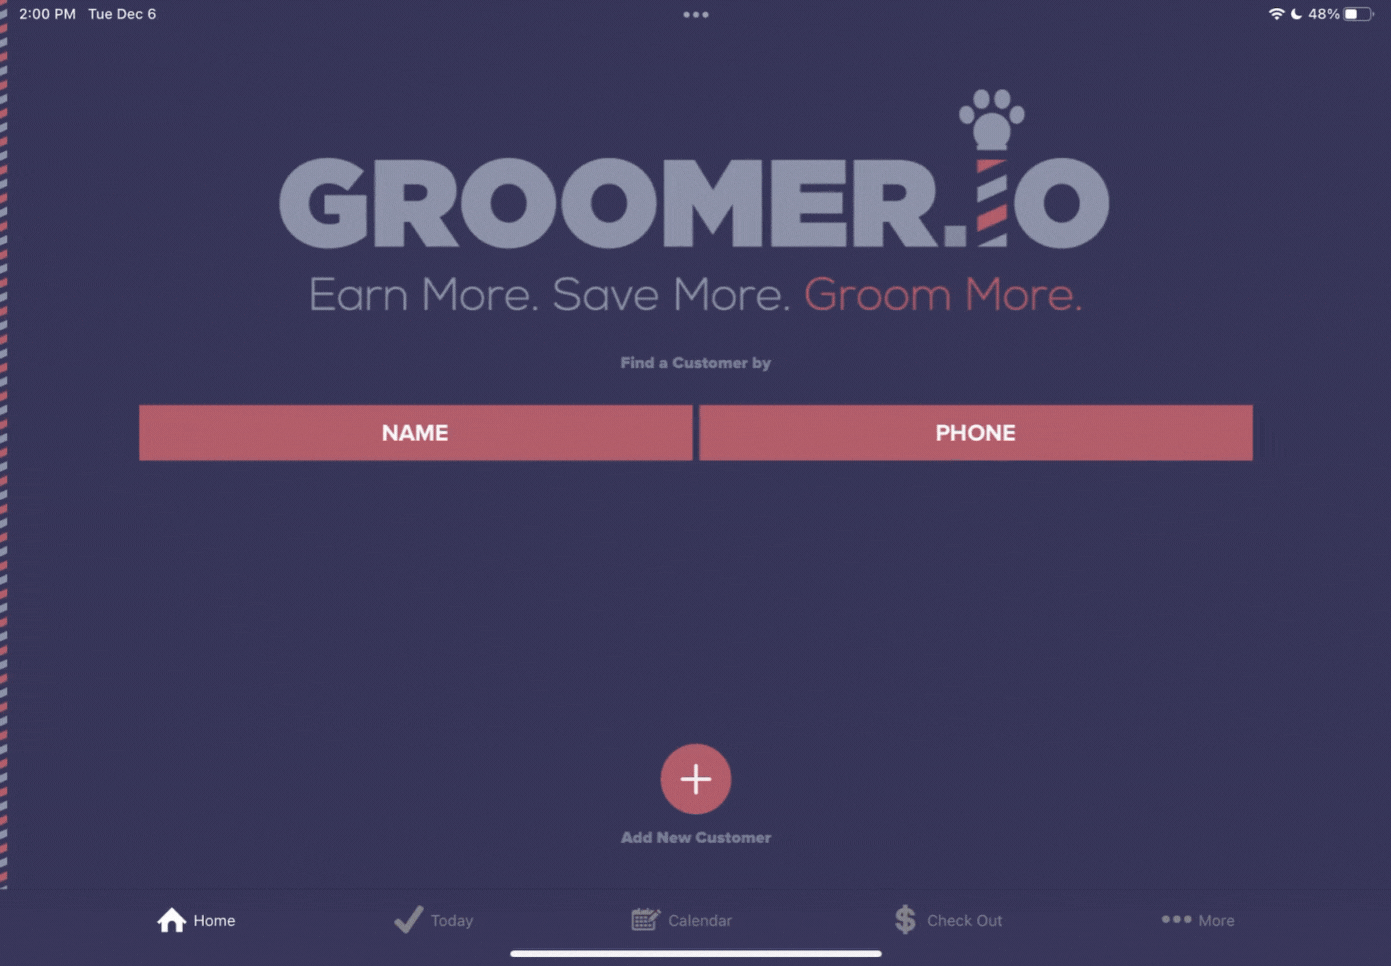 Overview of Groomer.io online services available for salon